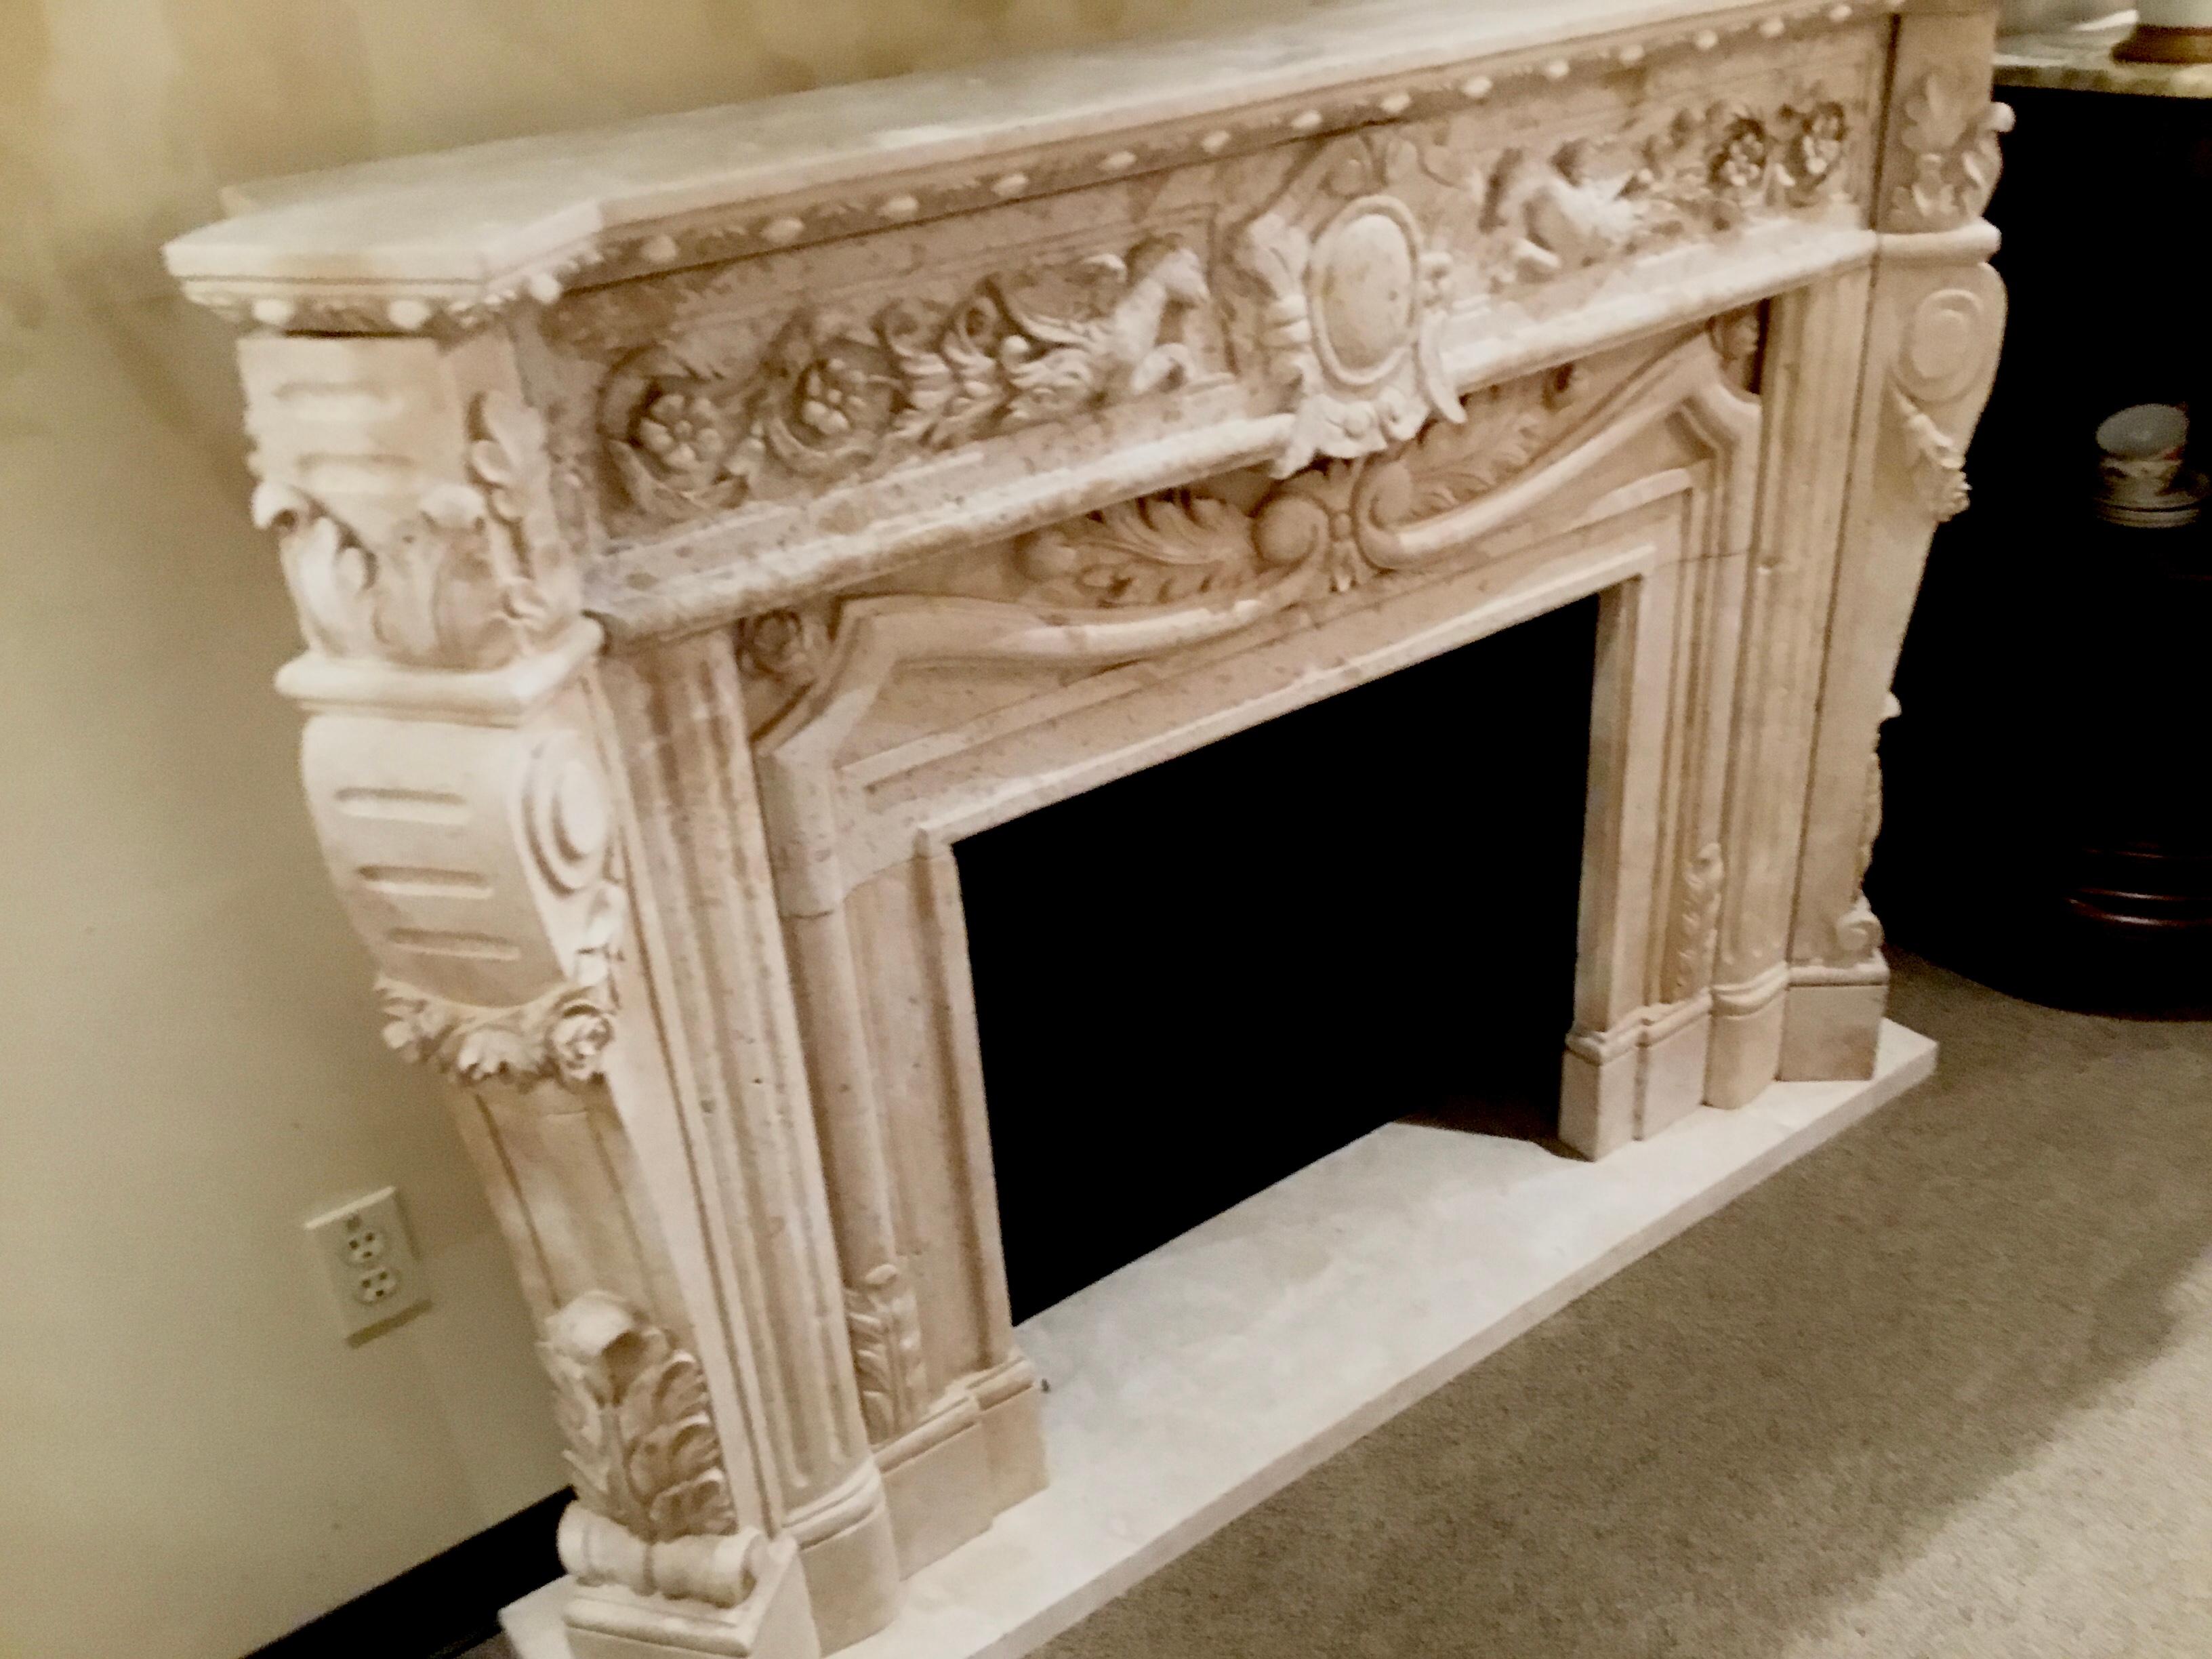 Handsome carved mantle in cream color. Pegasus the flying horse is carved into the
Top horizontal piece. The sides are gracefully curved. The inside dimension is
Measures: 28.5” W by 26” H.